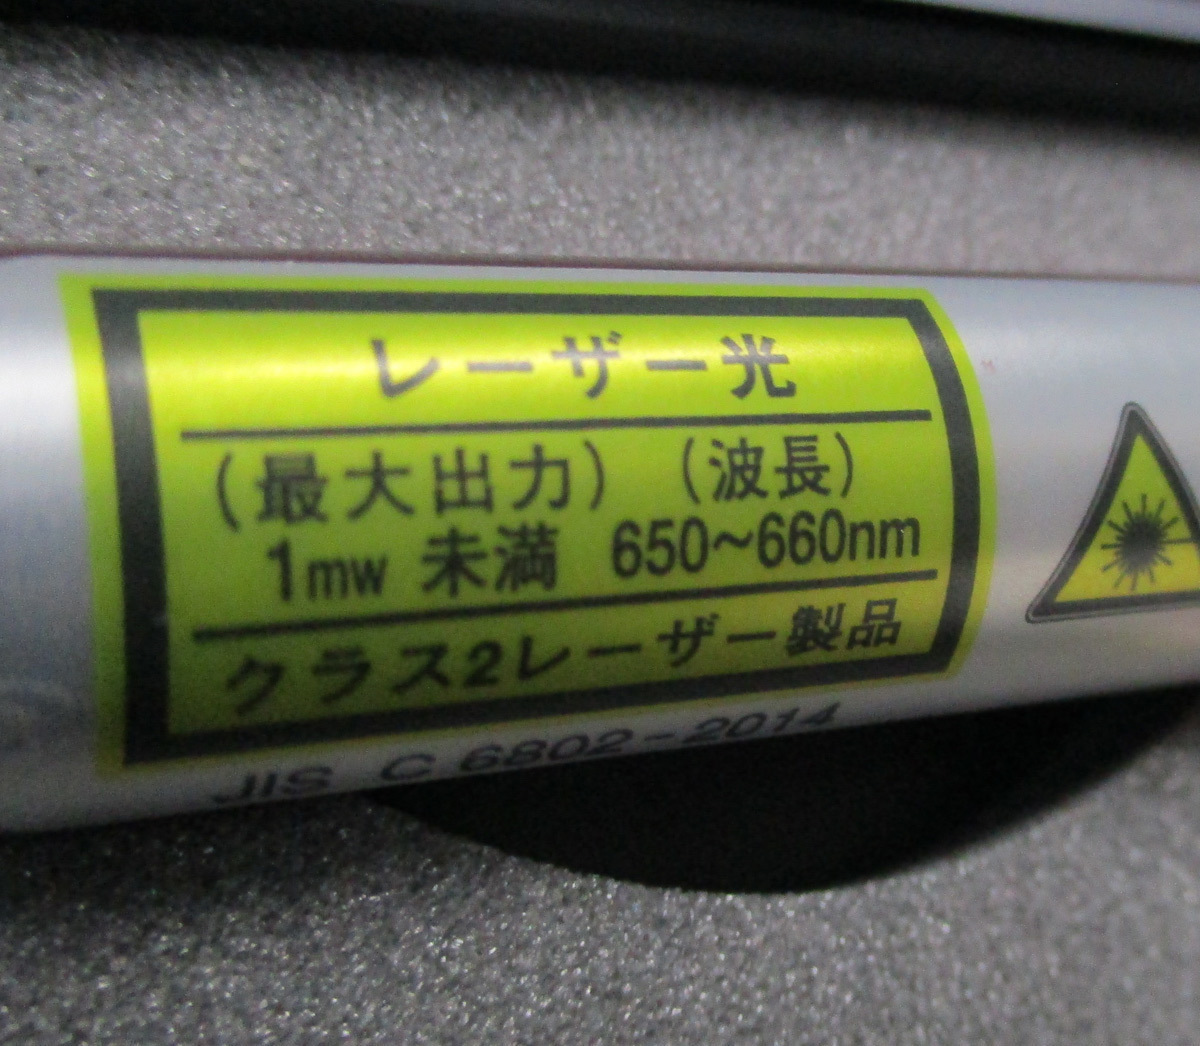  including in a package possibility pen type laser pointer TLP-3200L pink PSC Mark made in Japan 